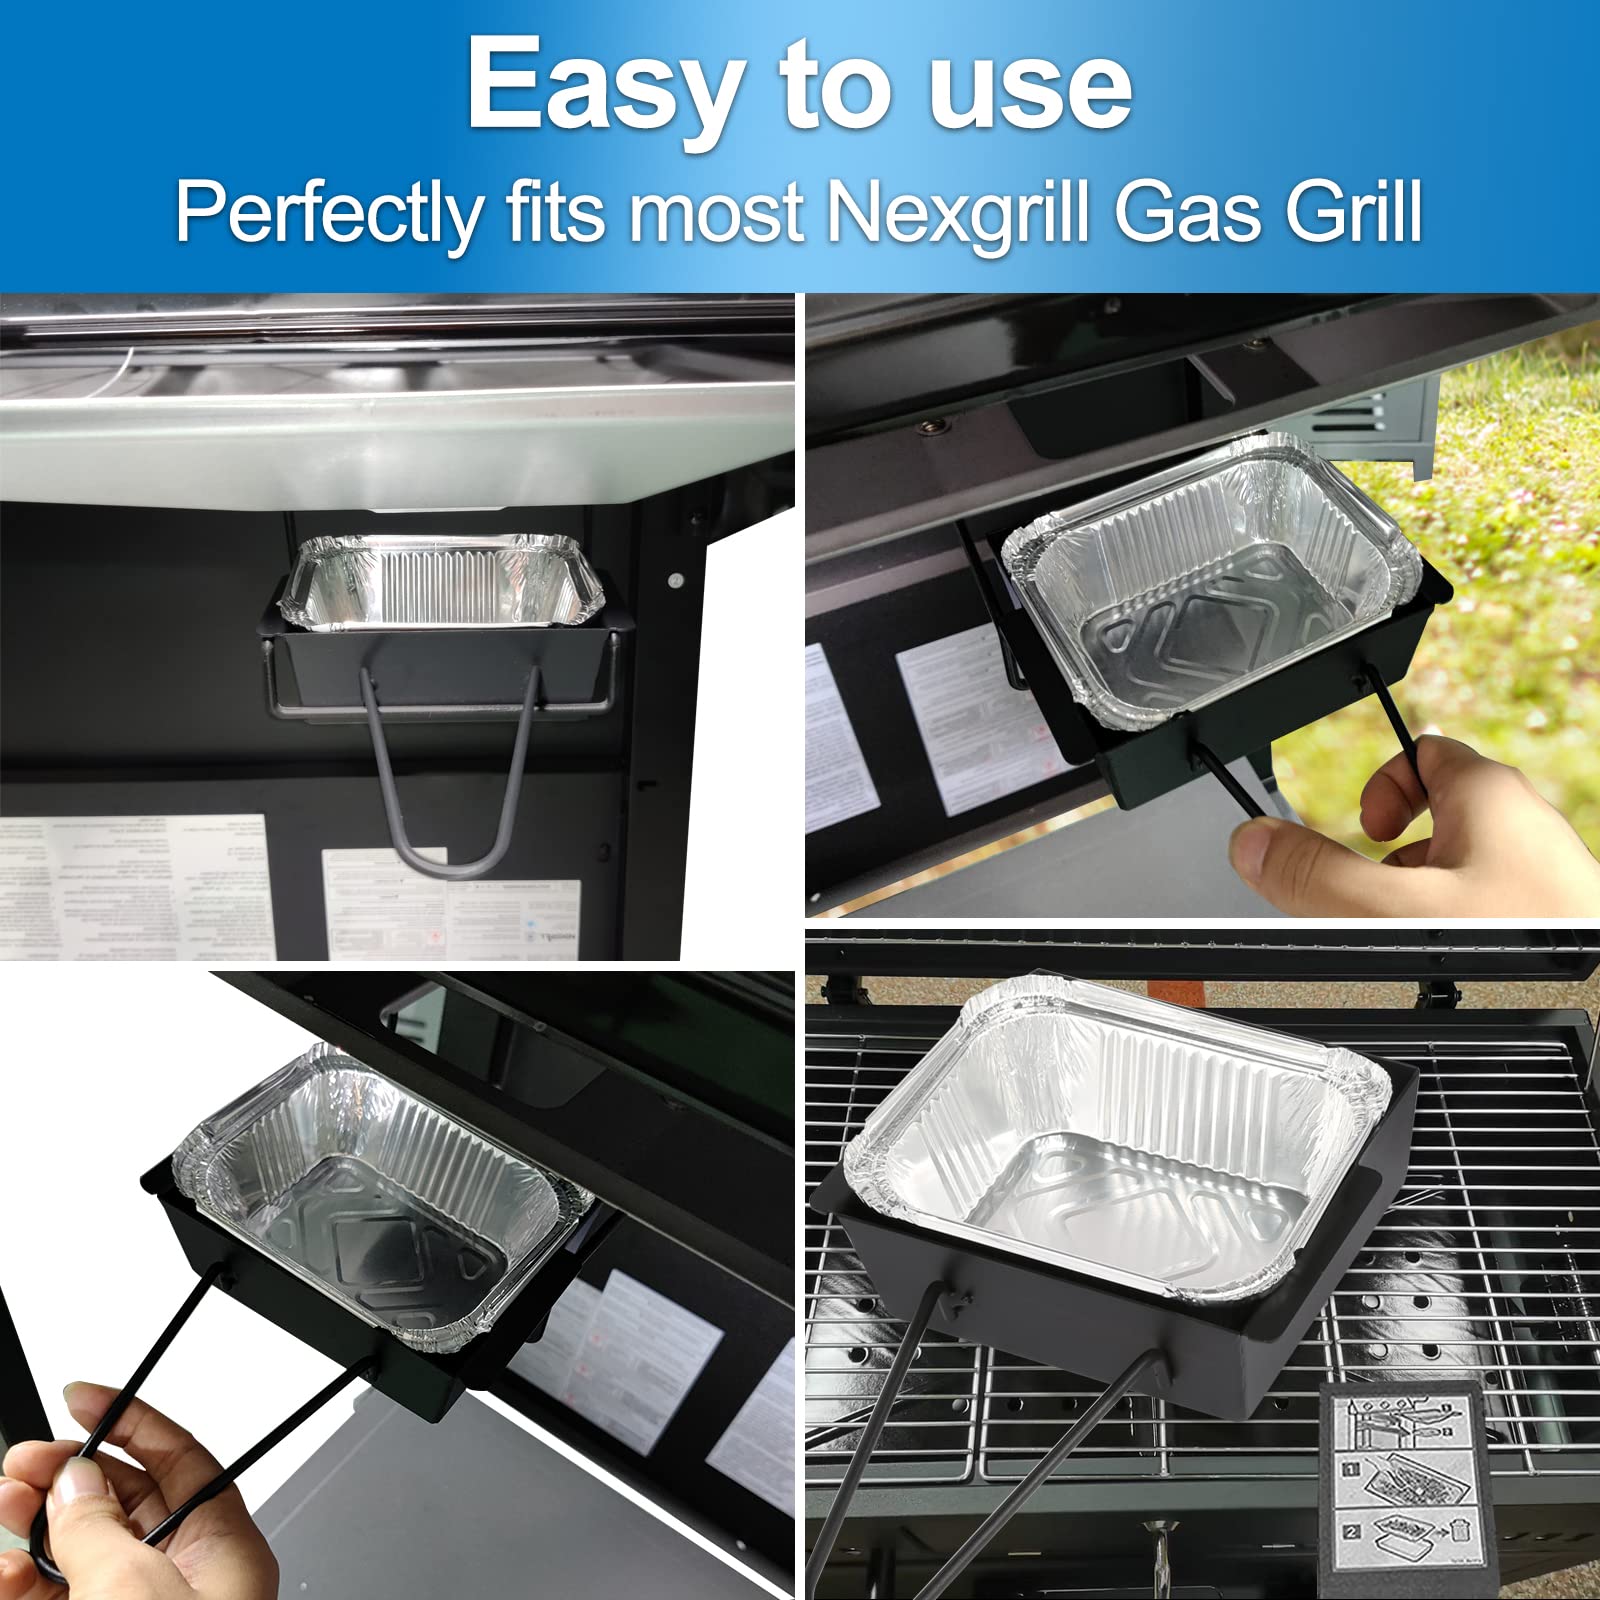 Uniflasy 6 Outlets Tact Push Button Grill Ignitor and Grease Box for Nexgrill 720-0830H, 720-0830D,720-0888,720-0888N and Most Nexgrill Grill Models